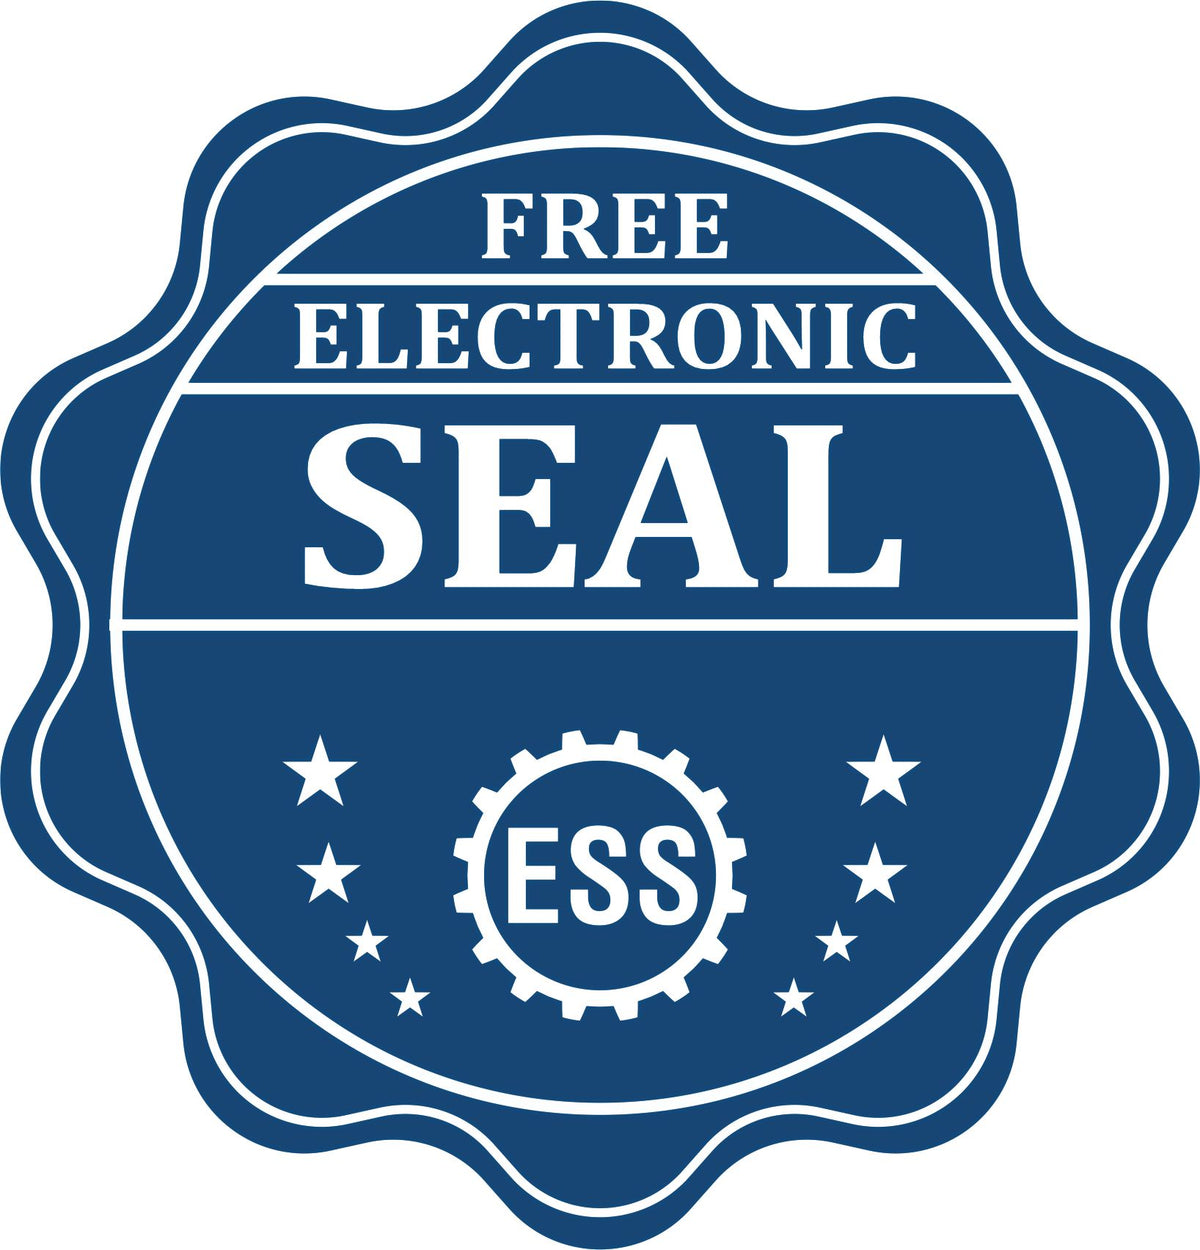 A badge showing a free electronic seal for the Kentucky Geologist Desk Seal with stars and the ESS gear on the emblem.